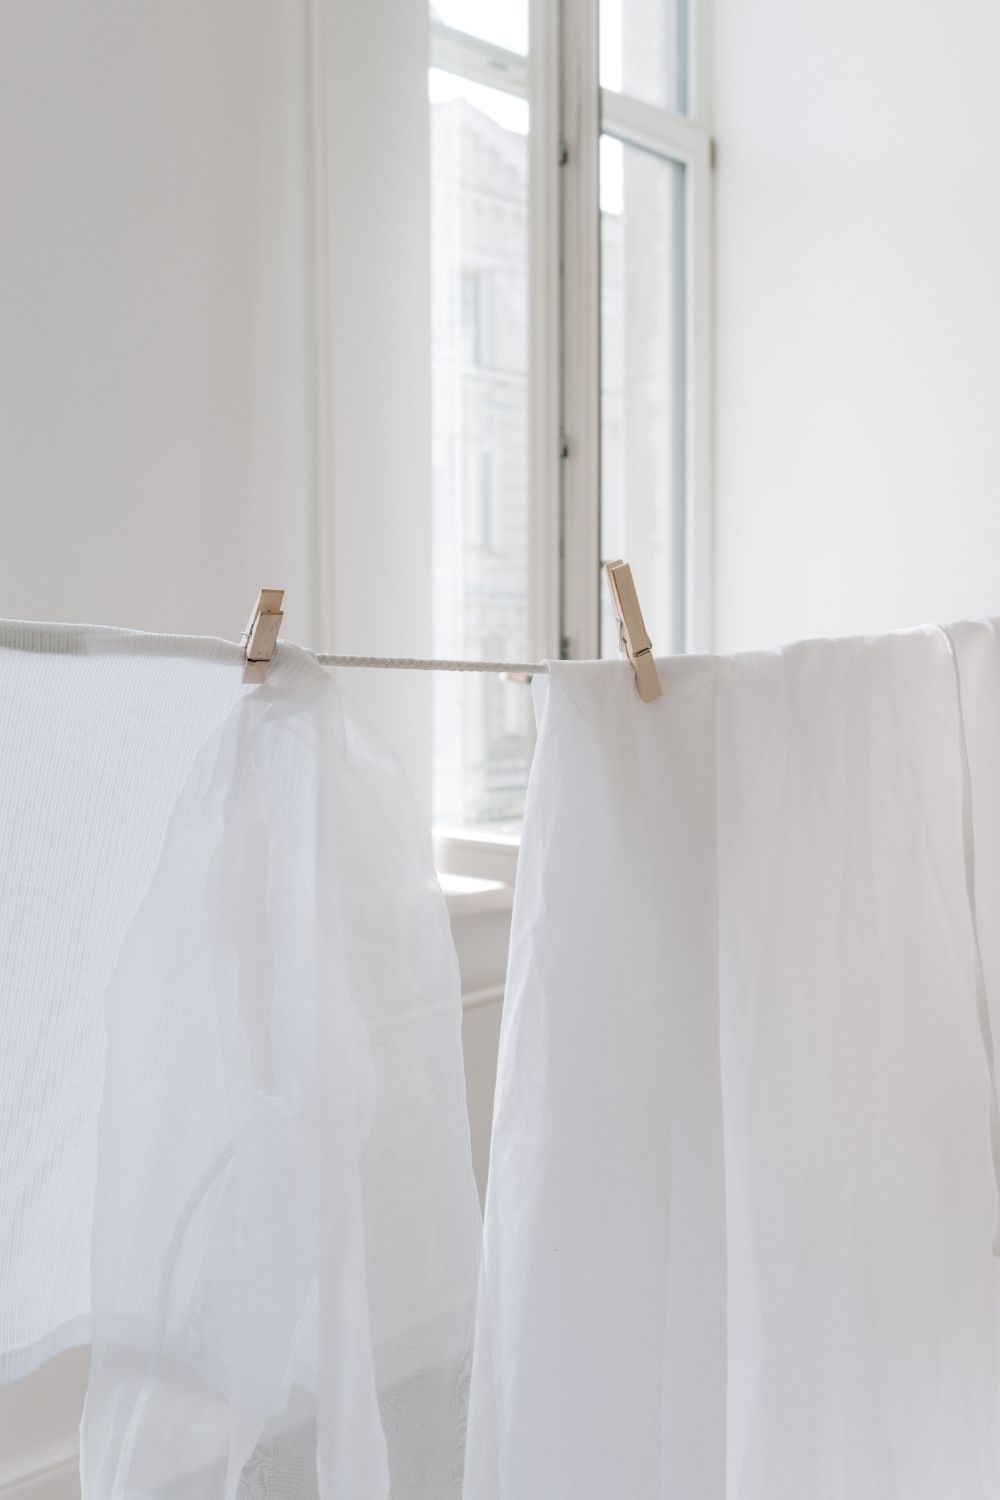 Clothes drying on indoor clothes line